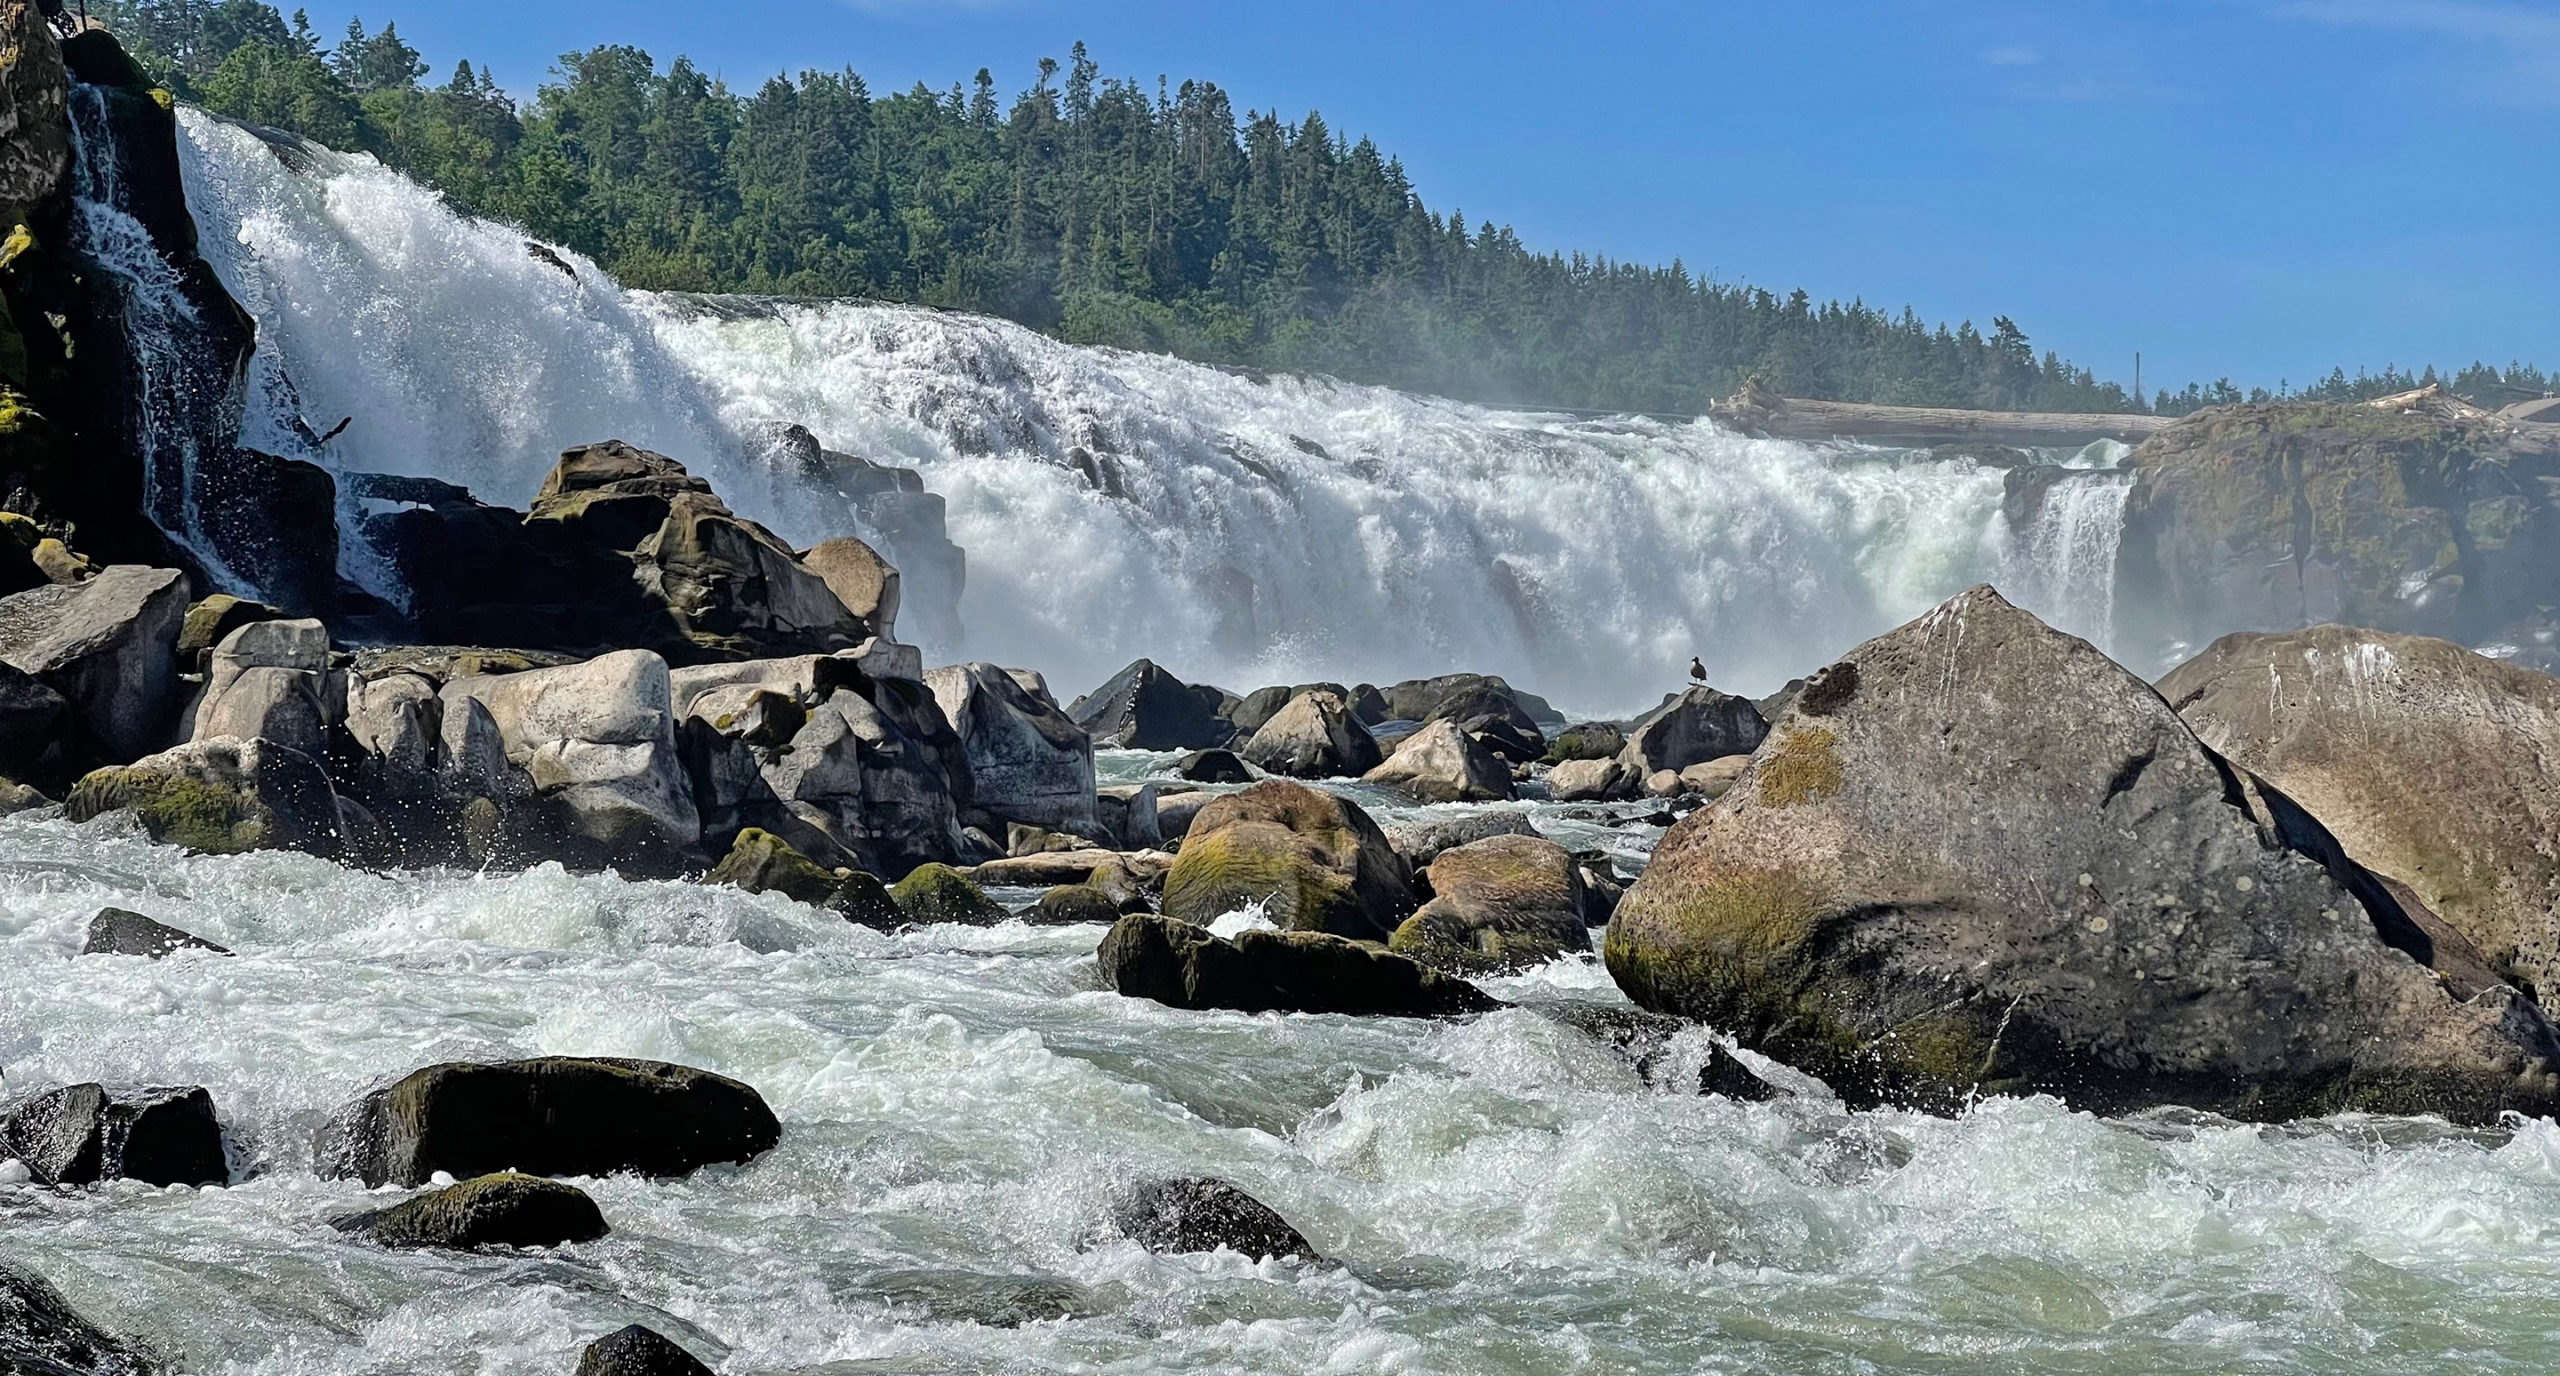 Closeup of Willamette falls scene from the river with the rapids in the foreground.